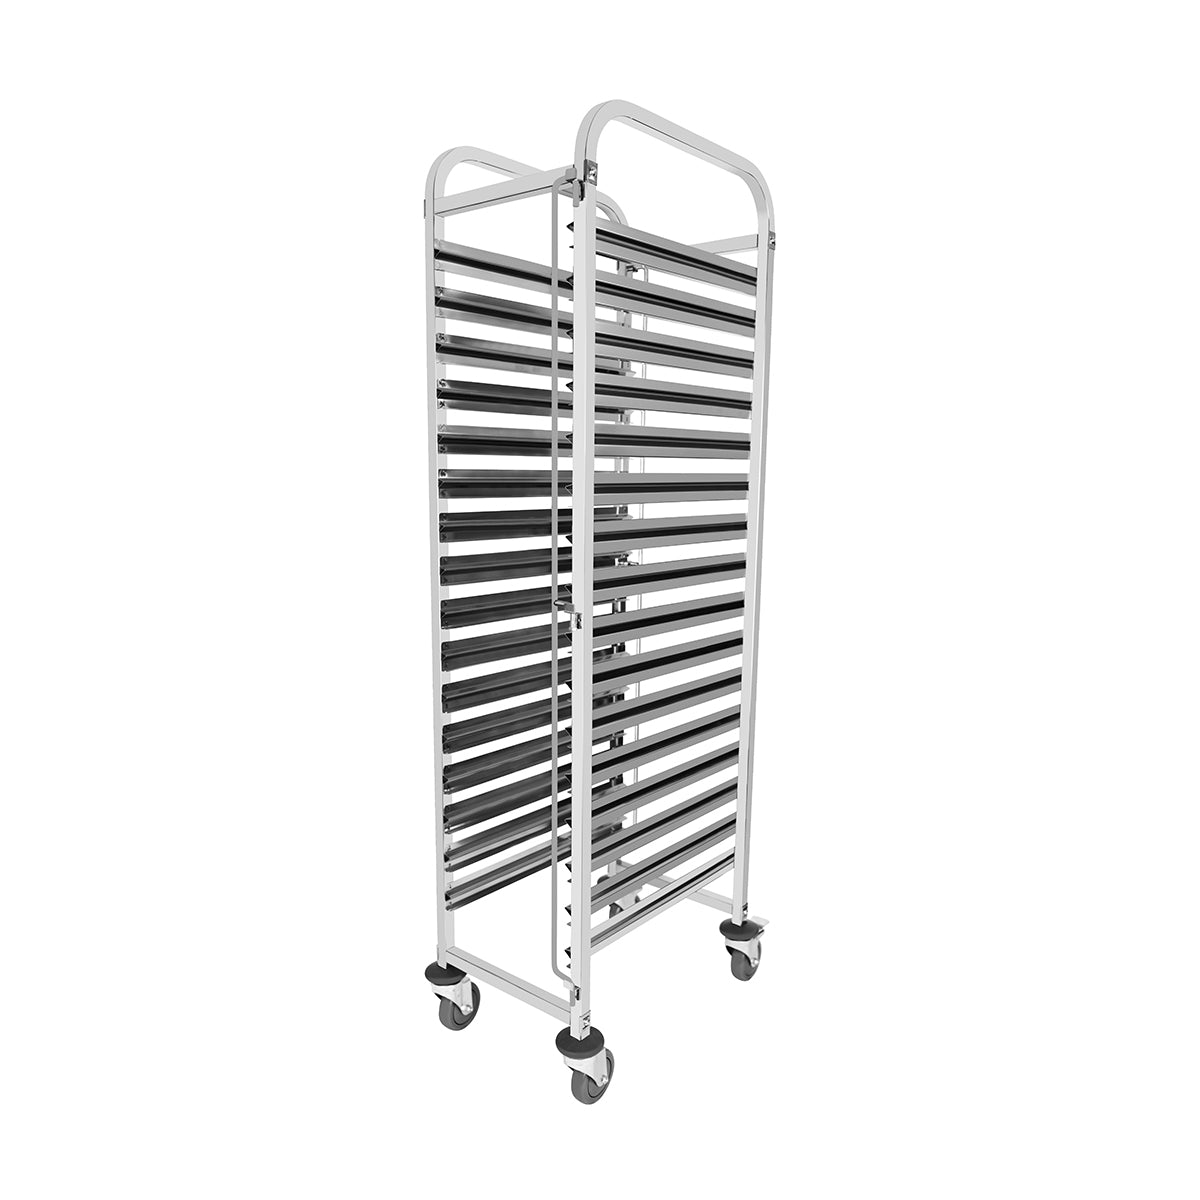 GN-602 Chef Inox Gastronorm Trolley Stainless Steel Fits 16 1/1 Size Trays 550x350x1735mm Tomkin Australia Hospitality Supplies